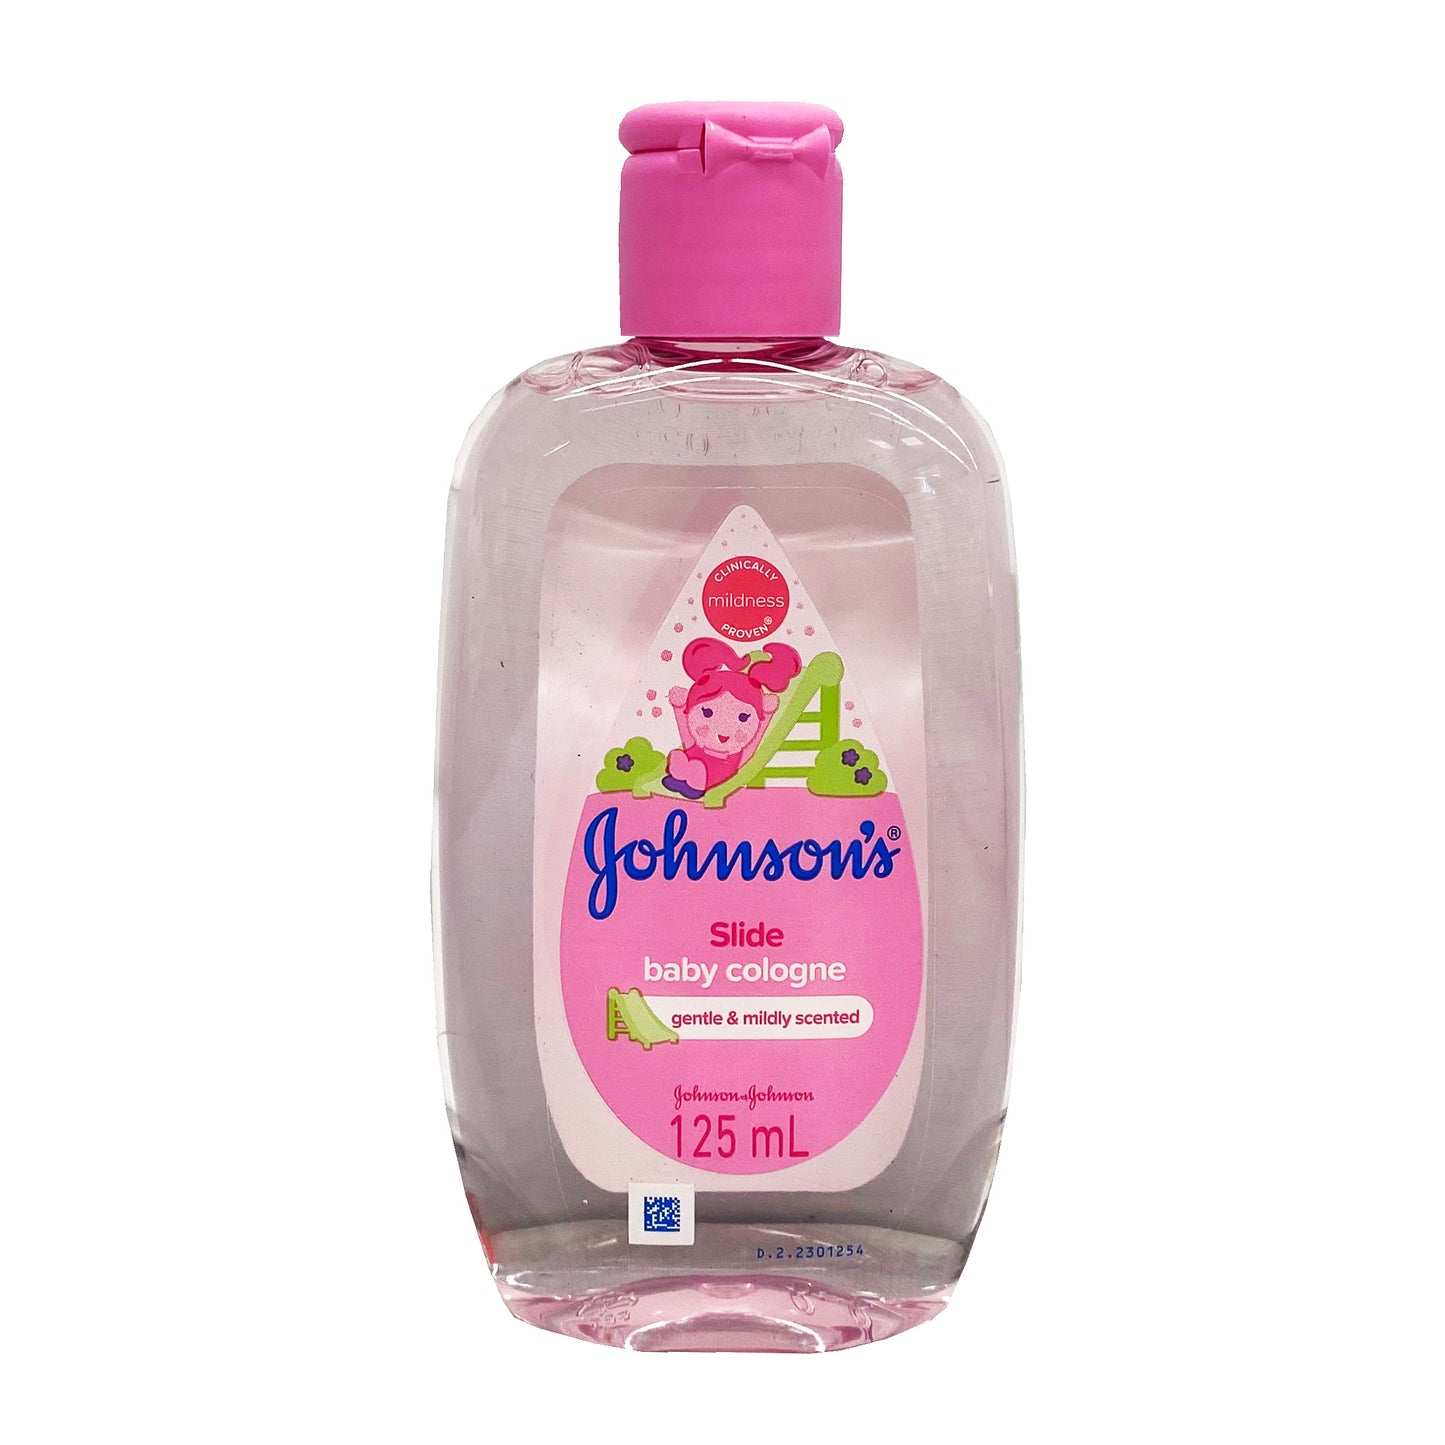 Front graphic view of Johnson's Baby Cologne - Slide 4.22oz (125ml)